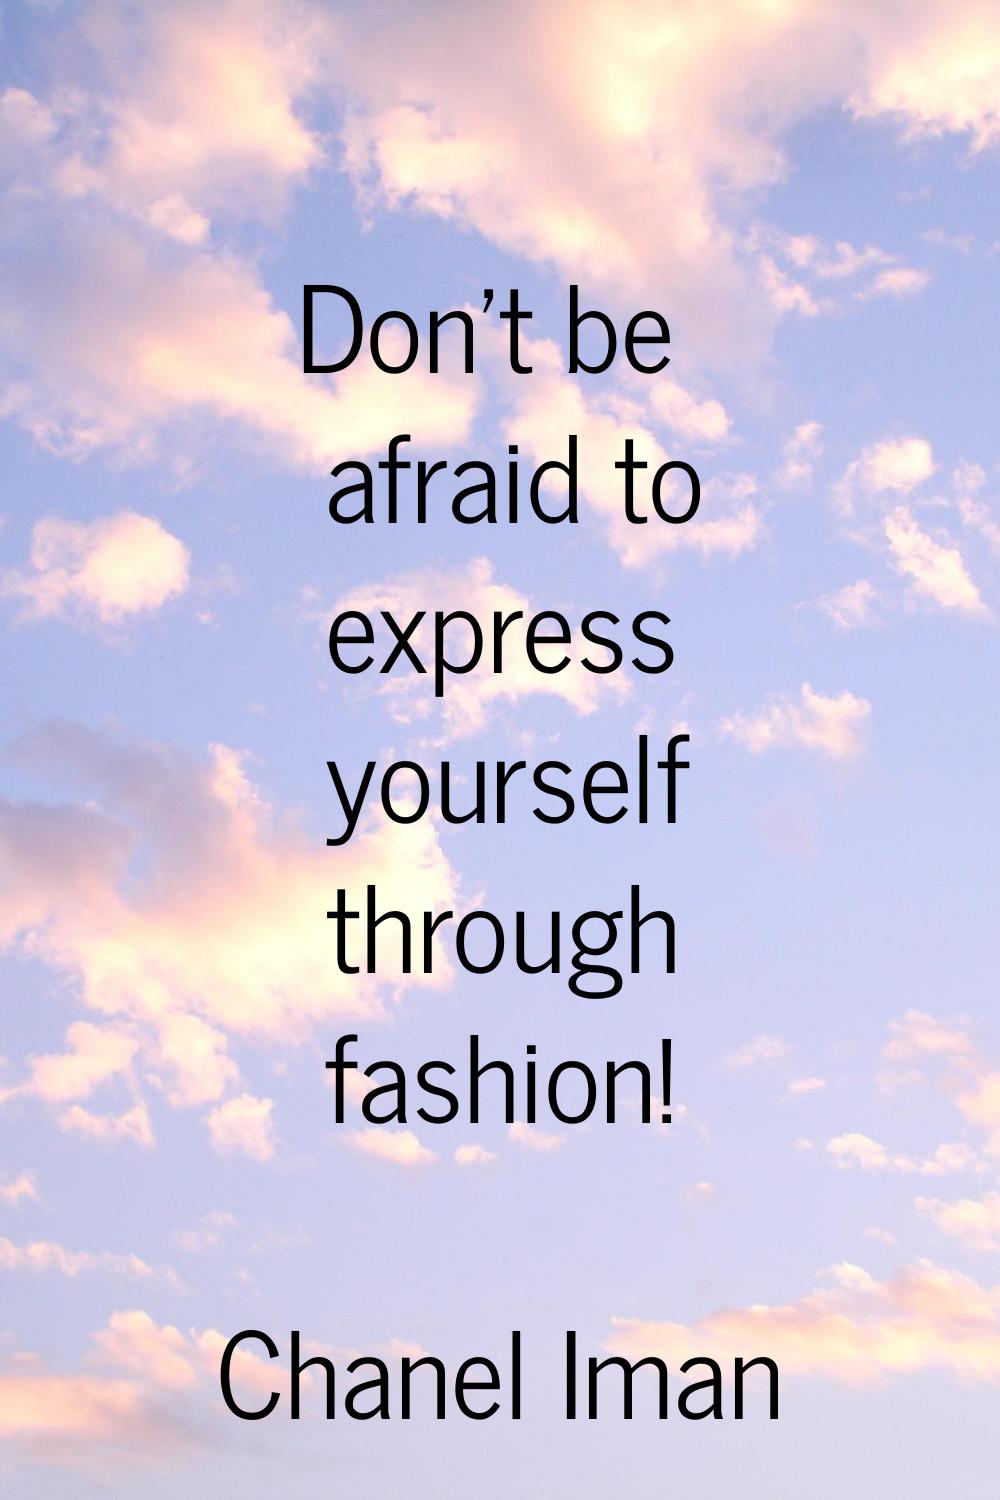 Don't be afraid to express yourself through fashion!